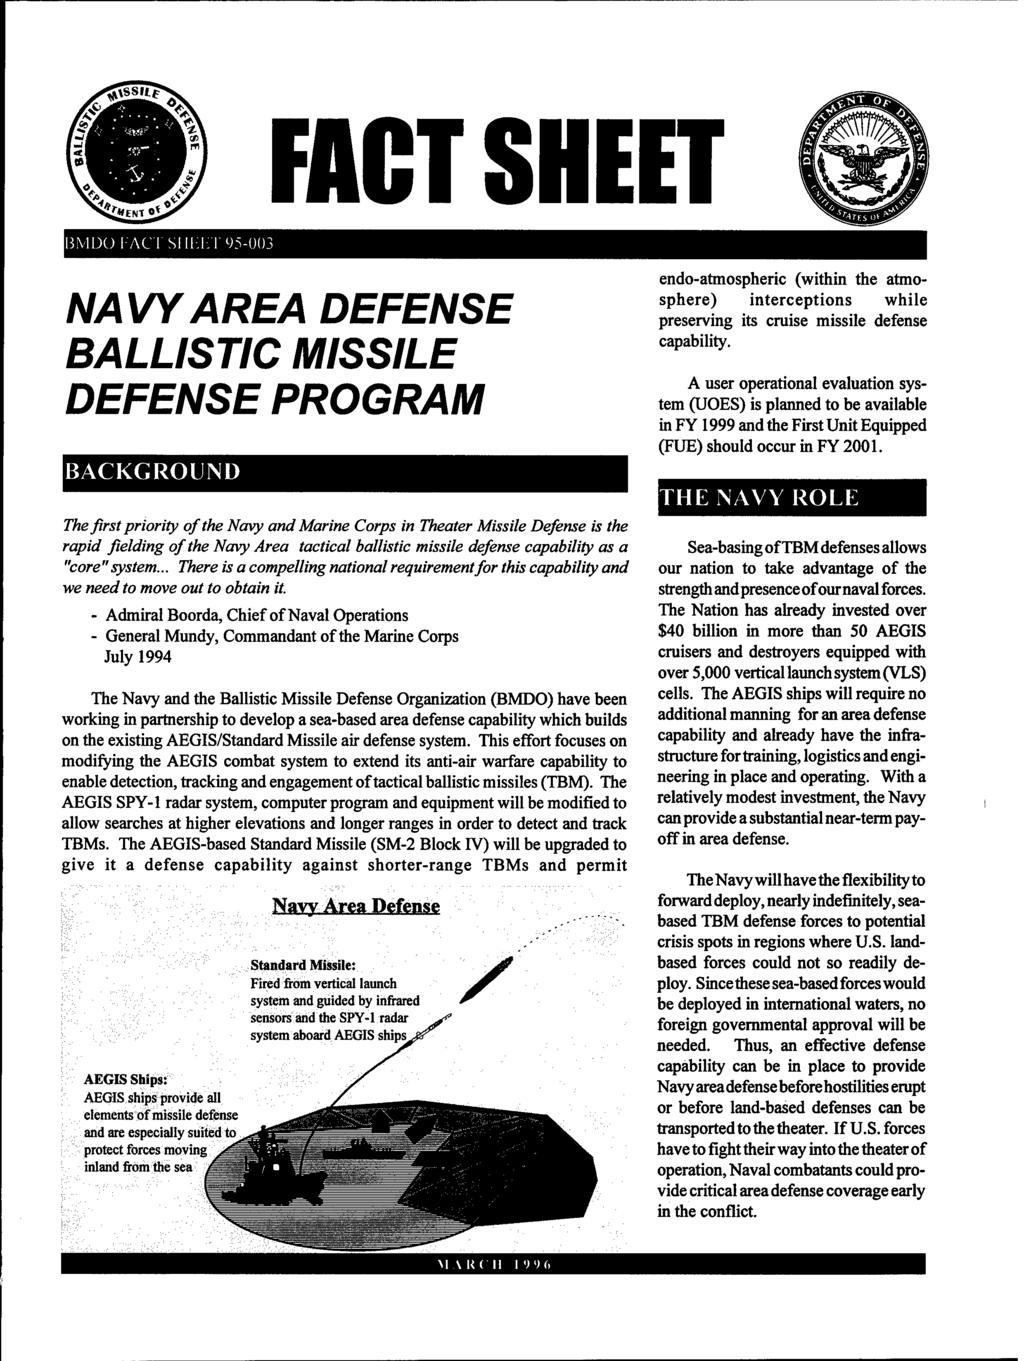 FACT SHEET ßMDÜI-'AC'I SI II-:I;T 95-003 NAVY AREA DEFENSE BALLISTIC MISSILE DEFENSE PROGRAM BACKGROUND The first priority of the Navy and Marine Corps in Theater Missile Defense is the rapid